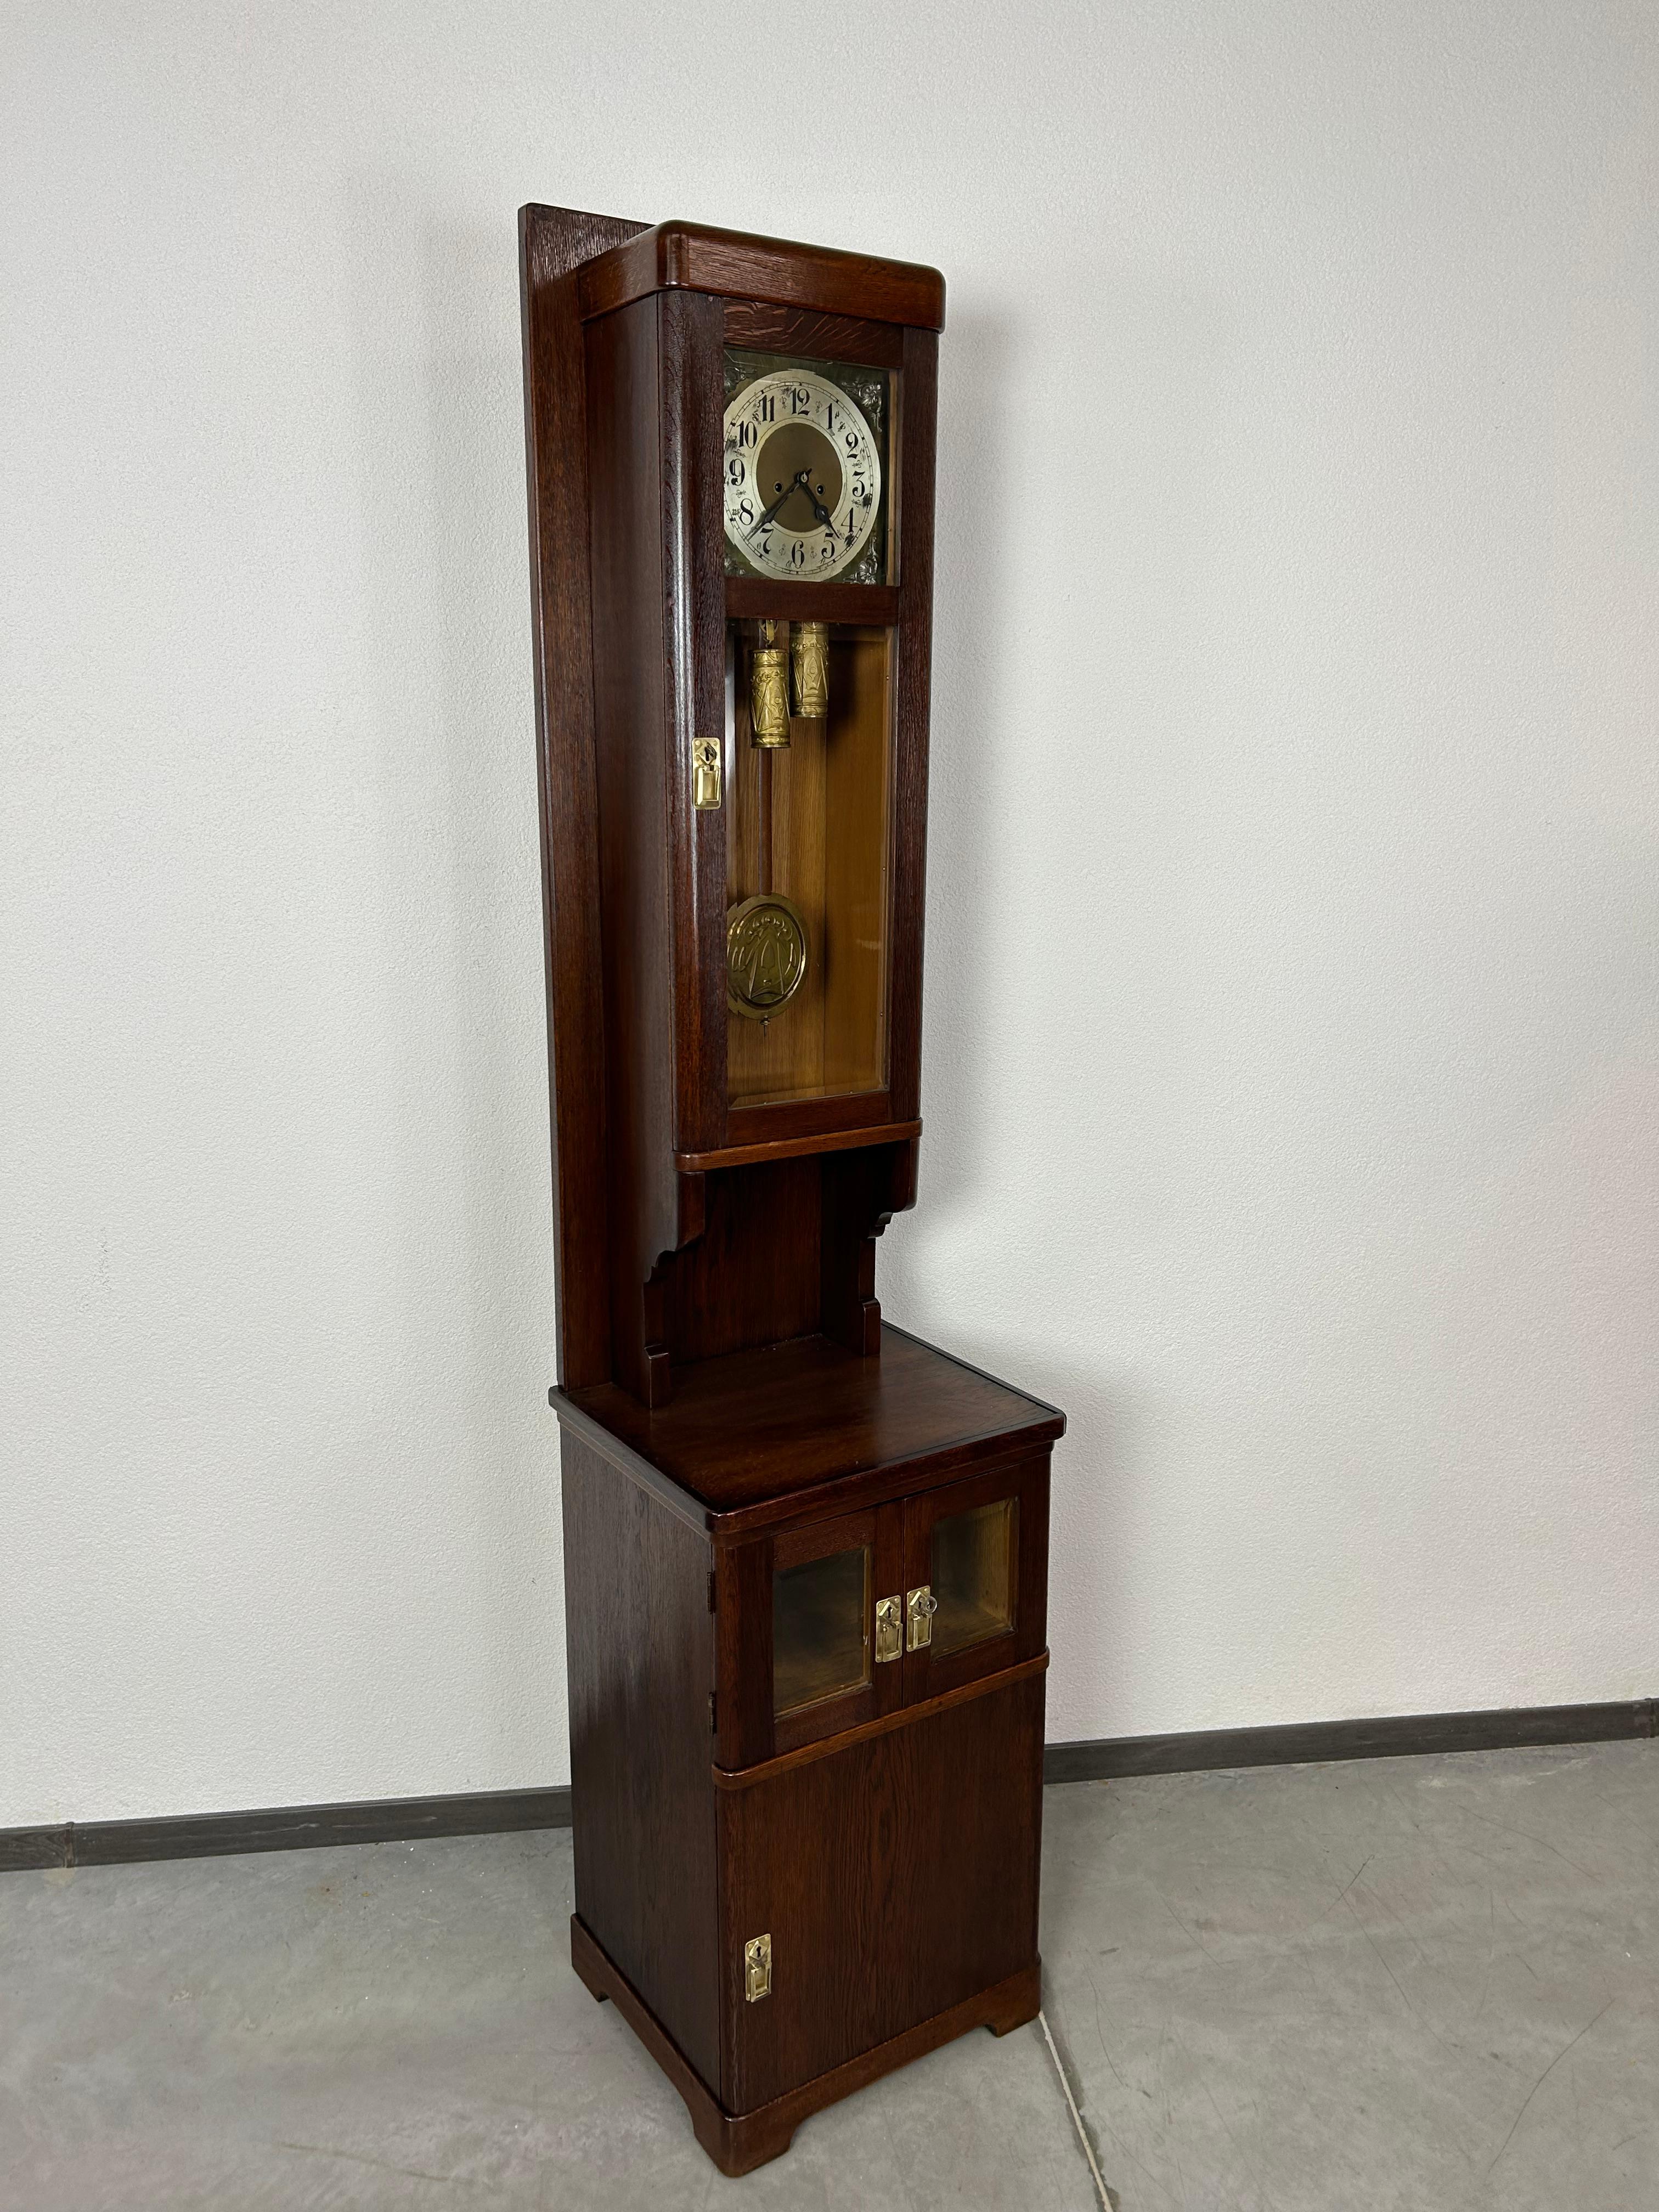 Floor clock in style of Vienna secession 6